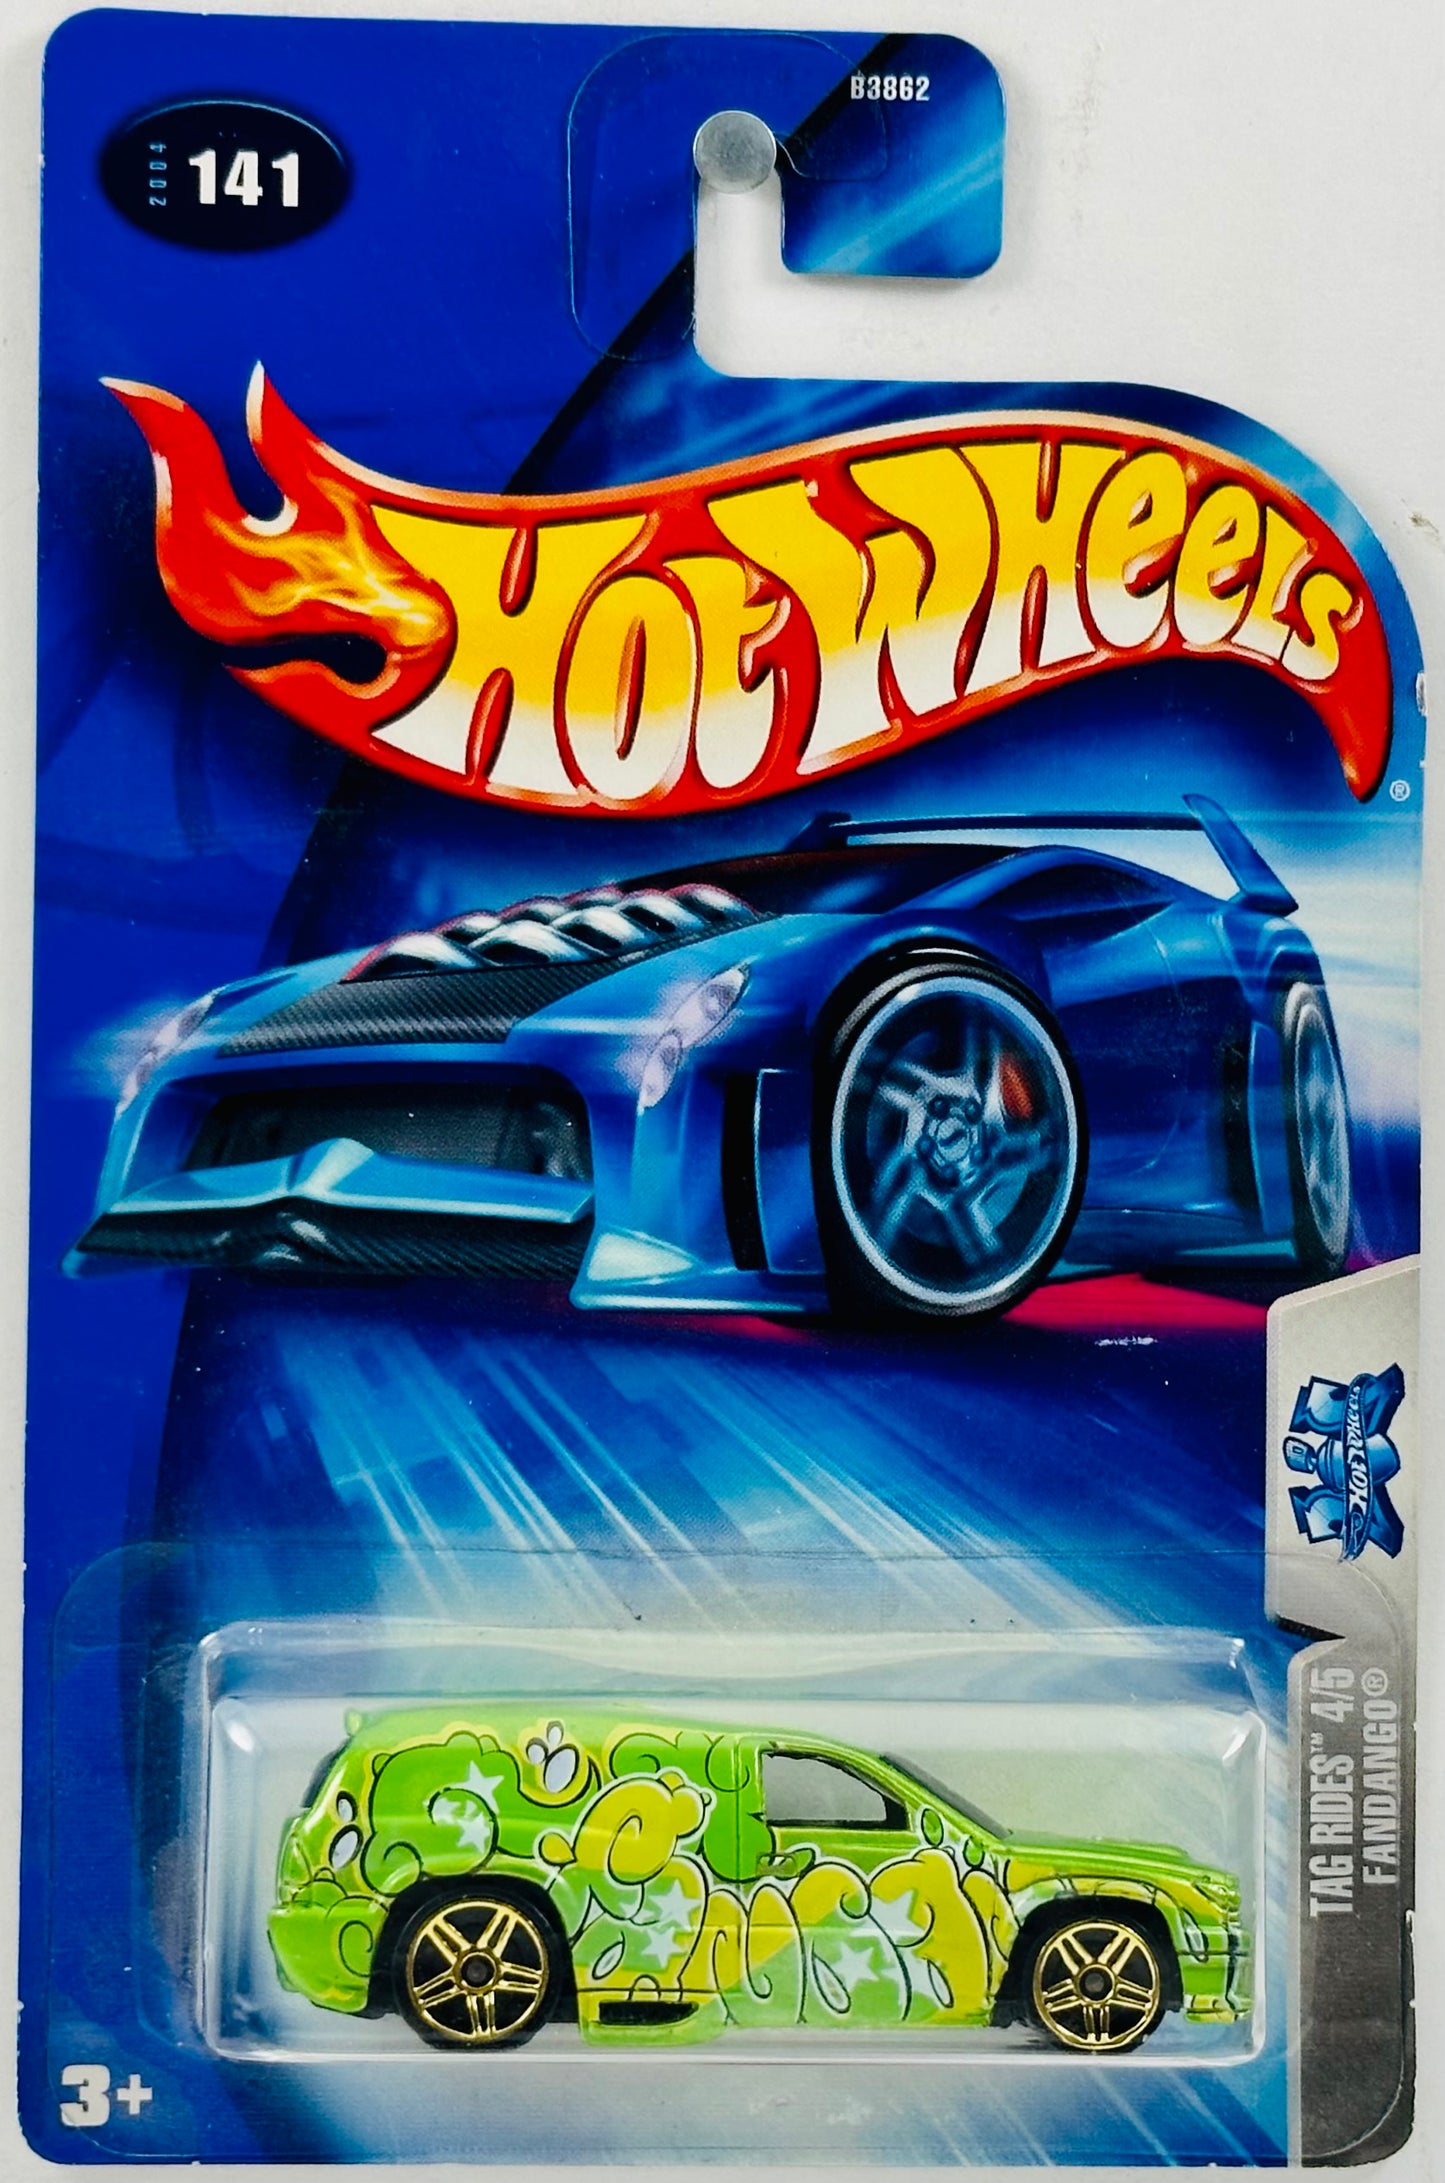 Hot Wheels 2004 - Collector # 141/212 - Tag Rides 04/05 - Fandango - Light Green - Green Roof Tampo - Gold 5 Spokes - USA NC